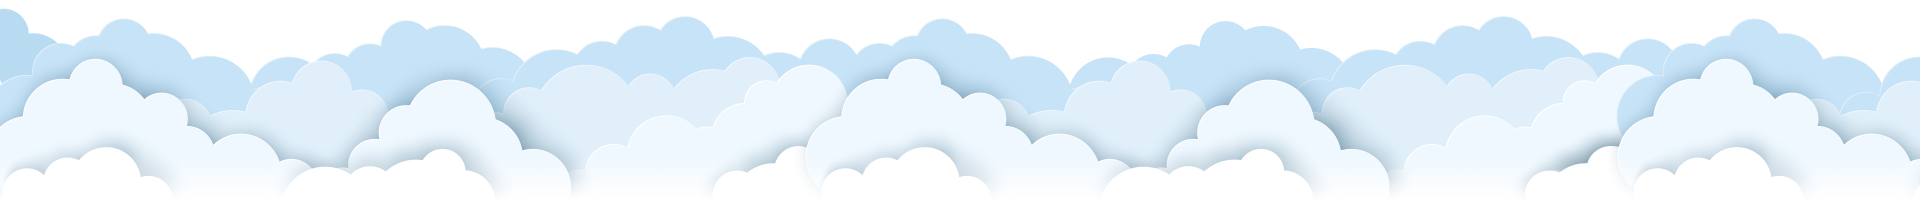 stacked clouds illustration